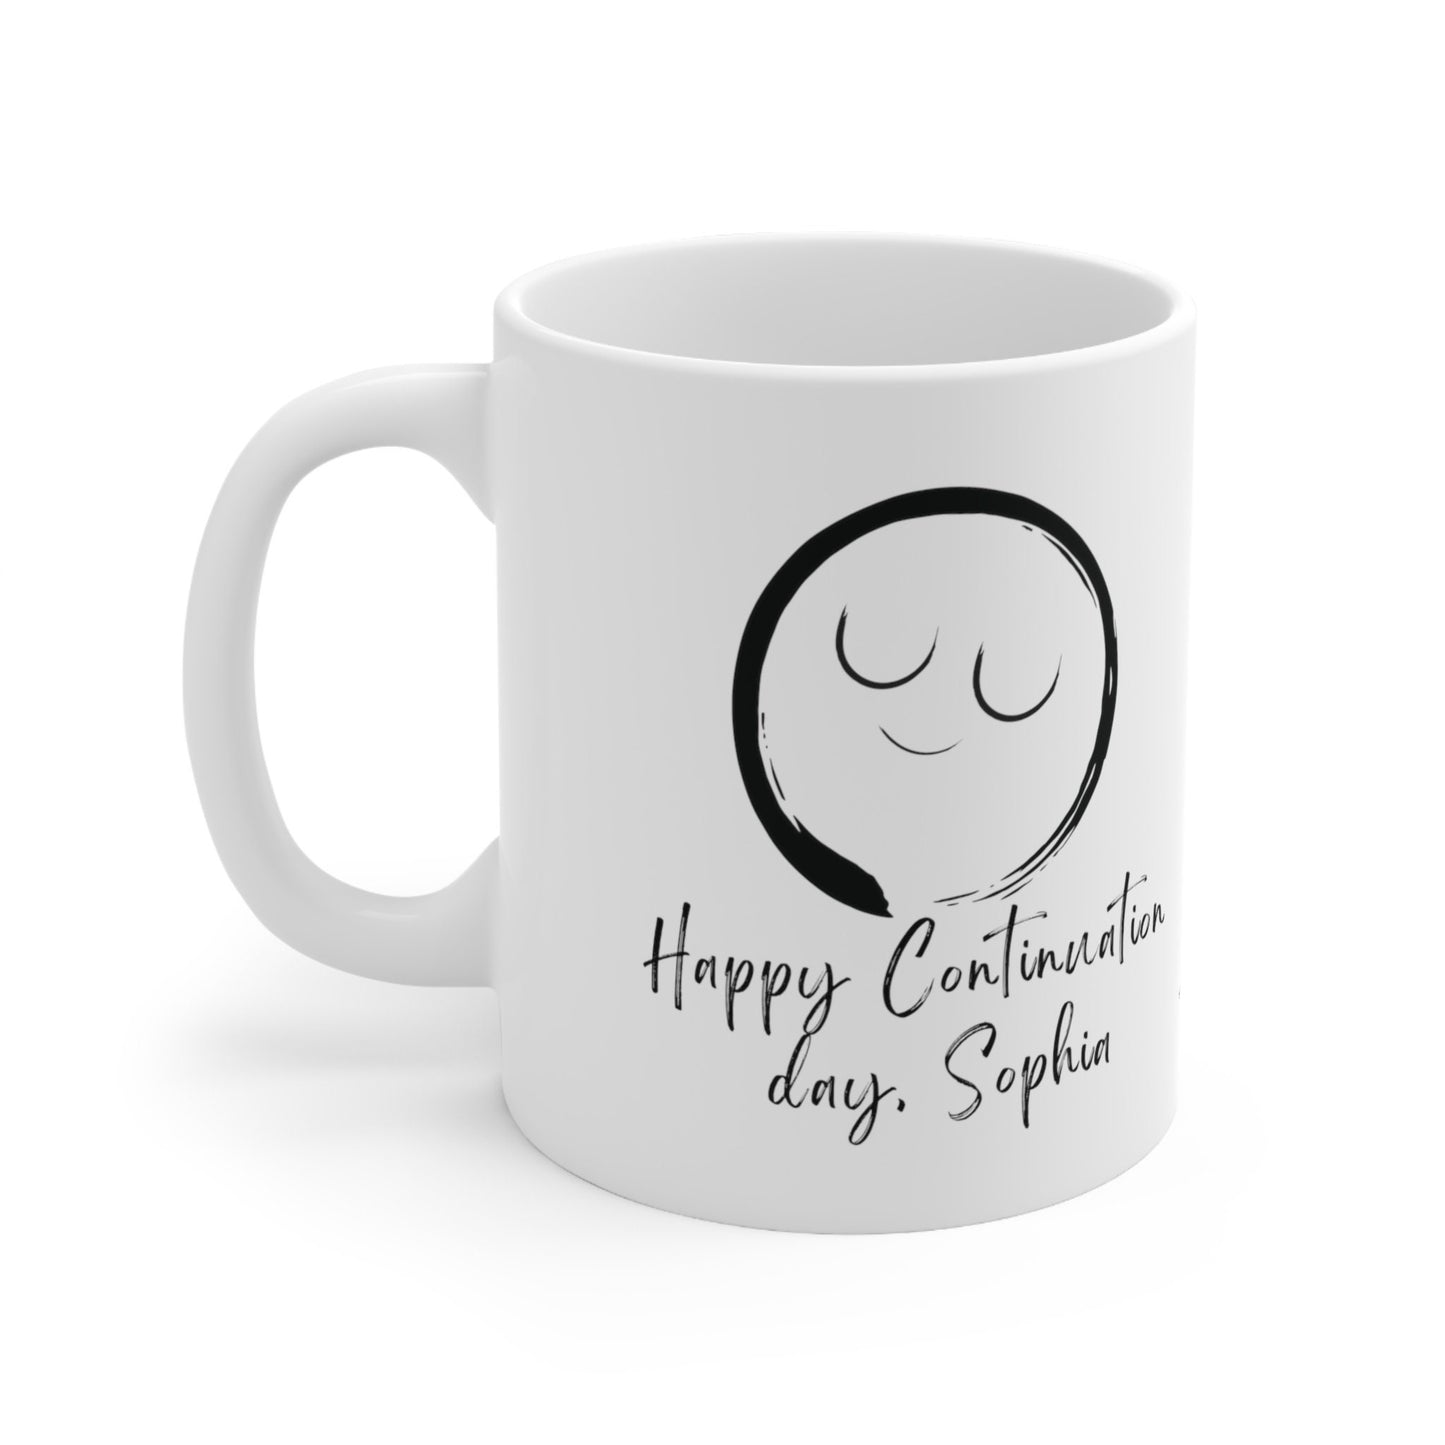 Personalized Happy Continuation day Mug, Zen gift for Plum Village meditation and mindfulness practitioners, mindful birthday gift